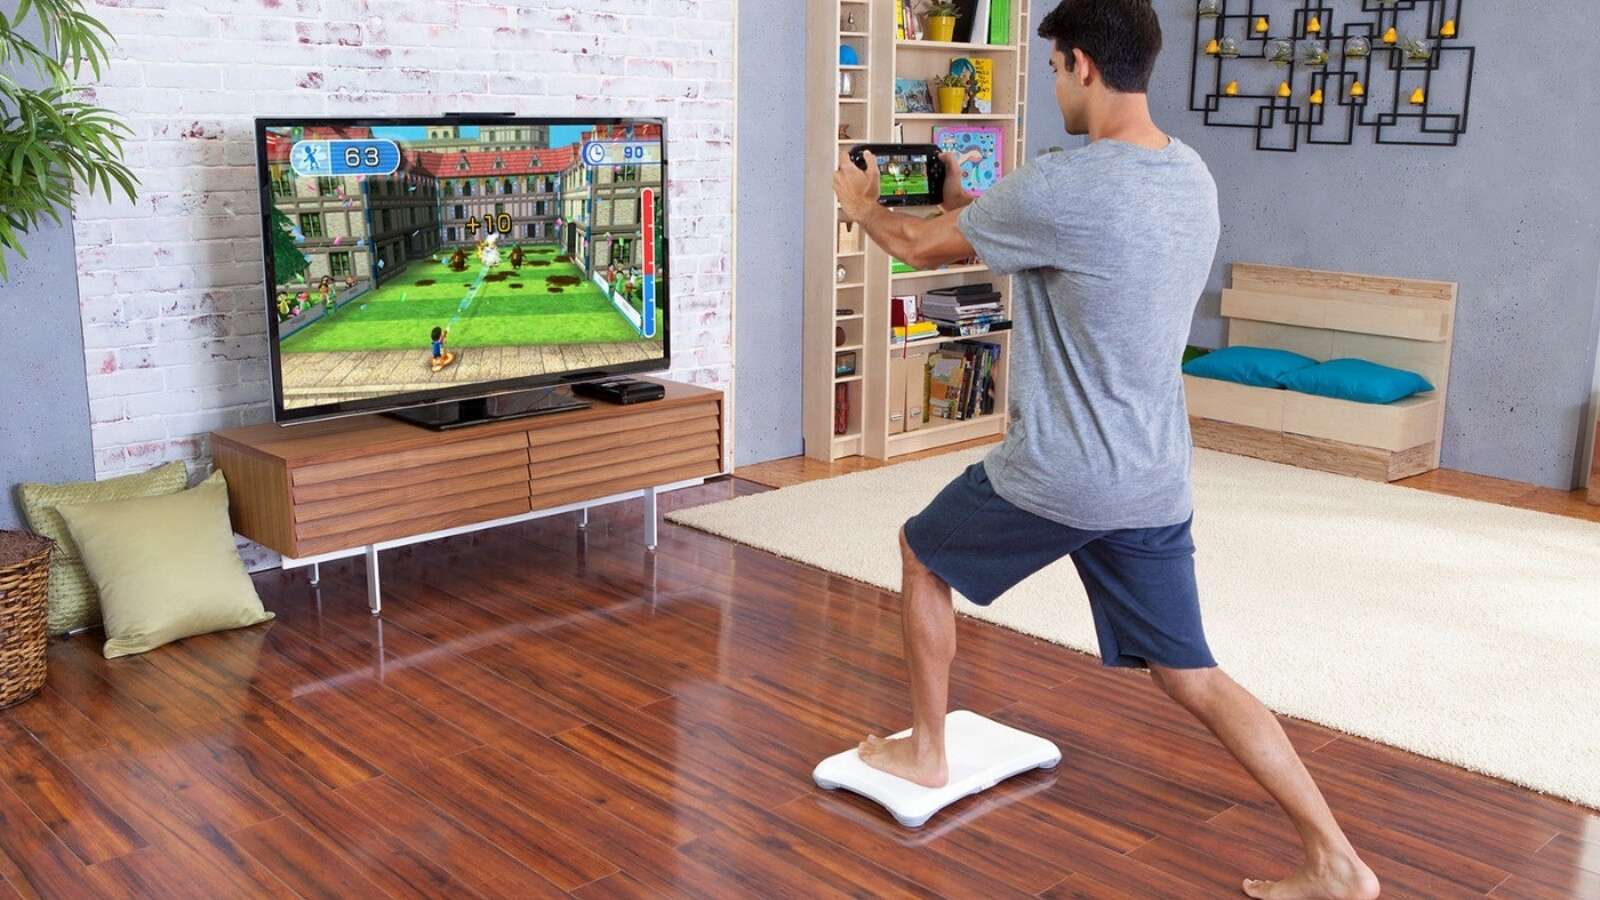 Wii fit balance boards